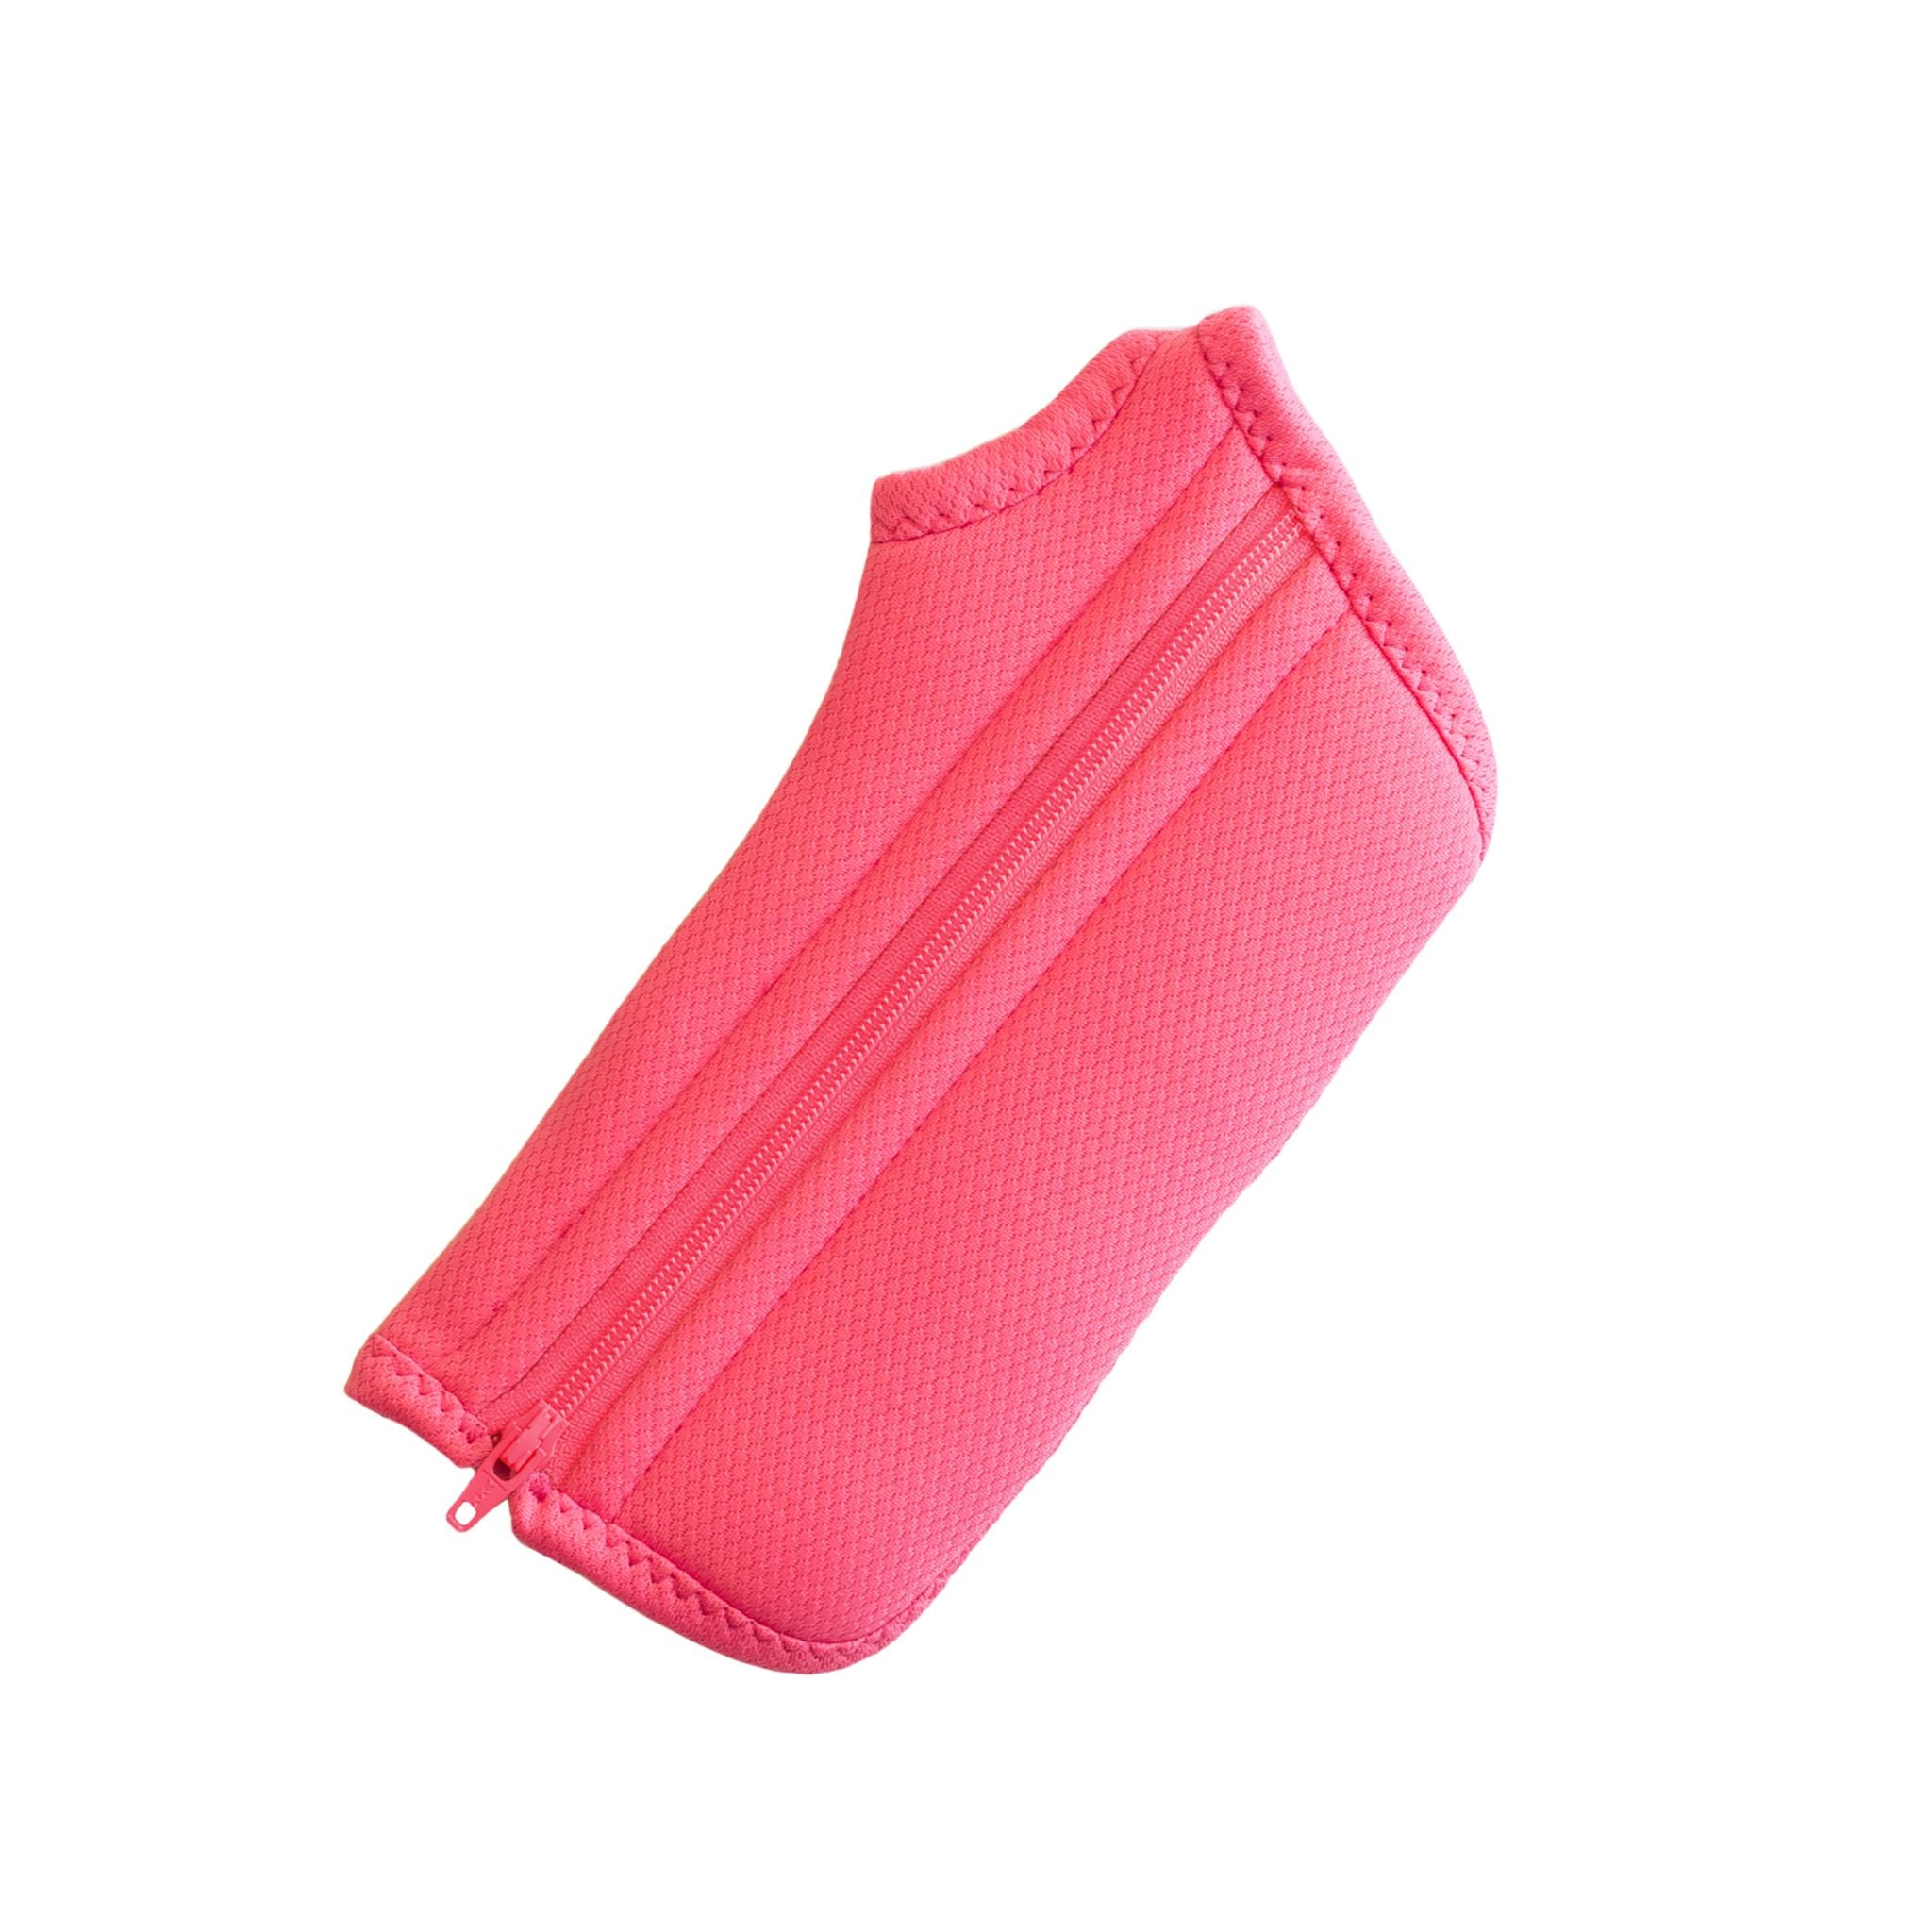 A close-up of a Bubblegum Pink Wrist Brace with a zipper perfect for women with arthritis and carpal tunnel syndrome.